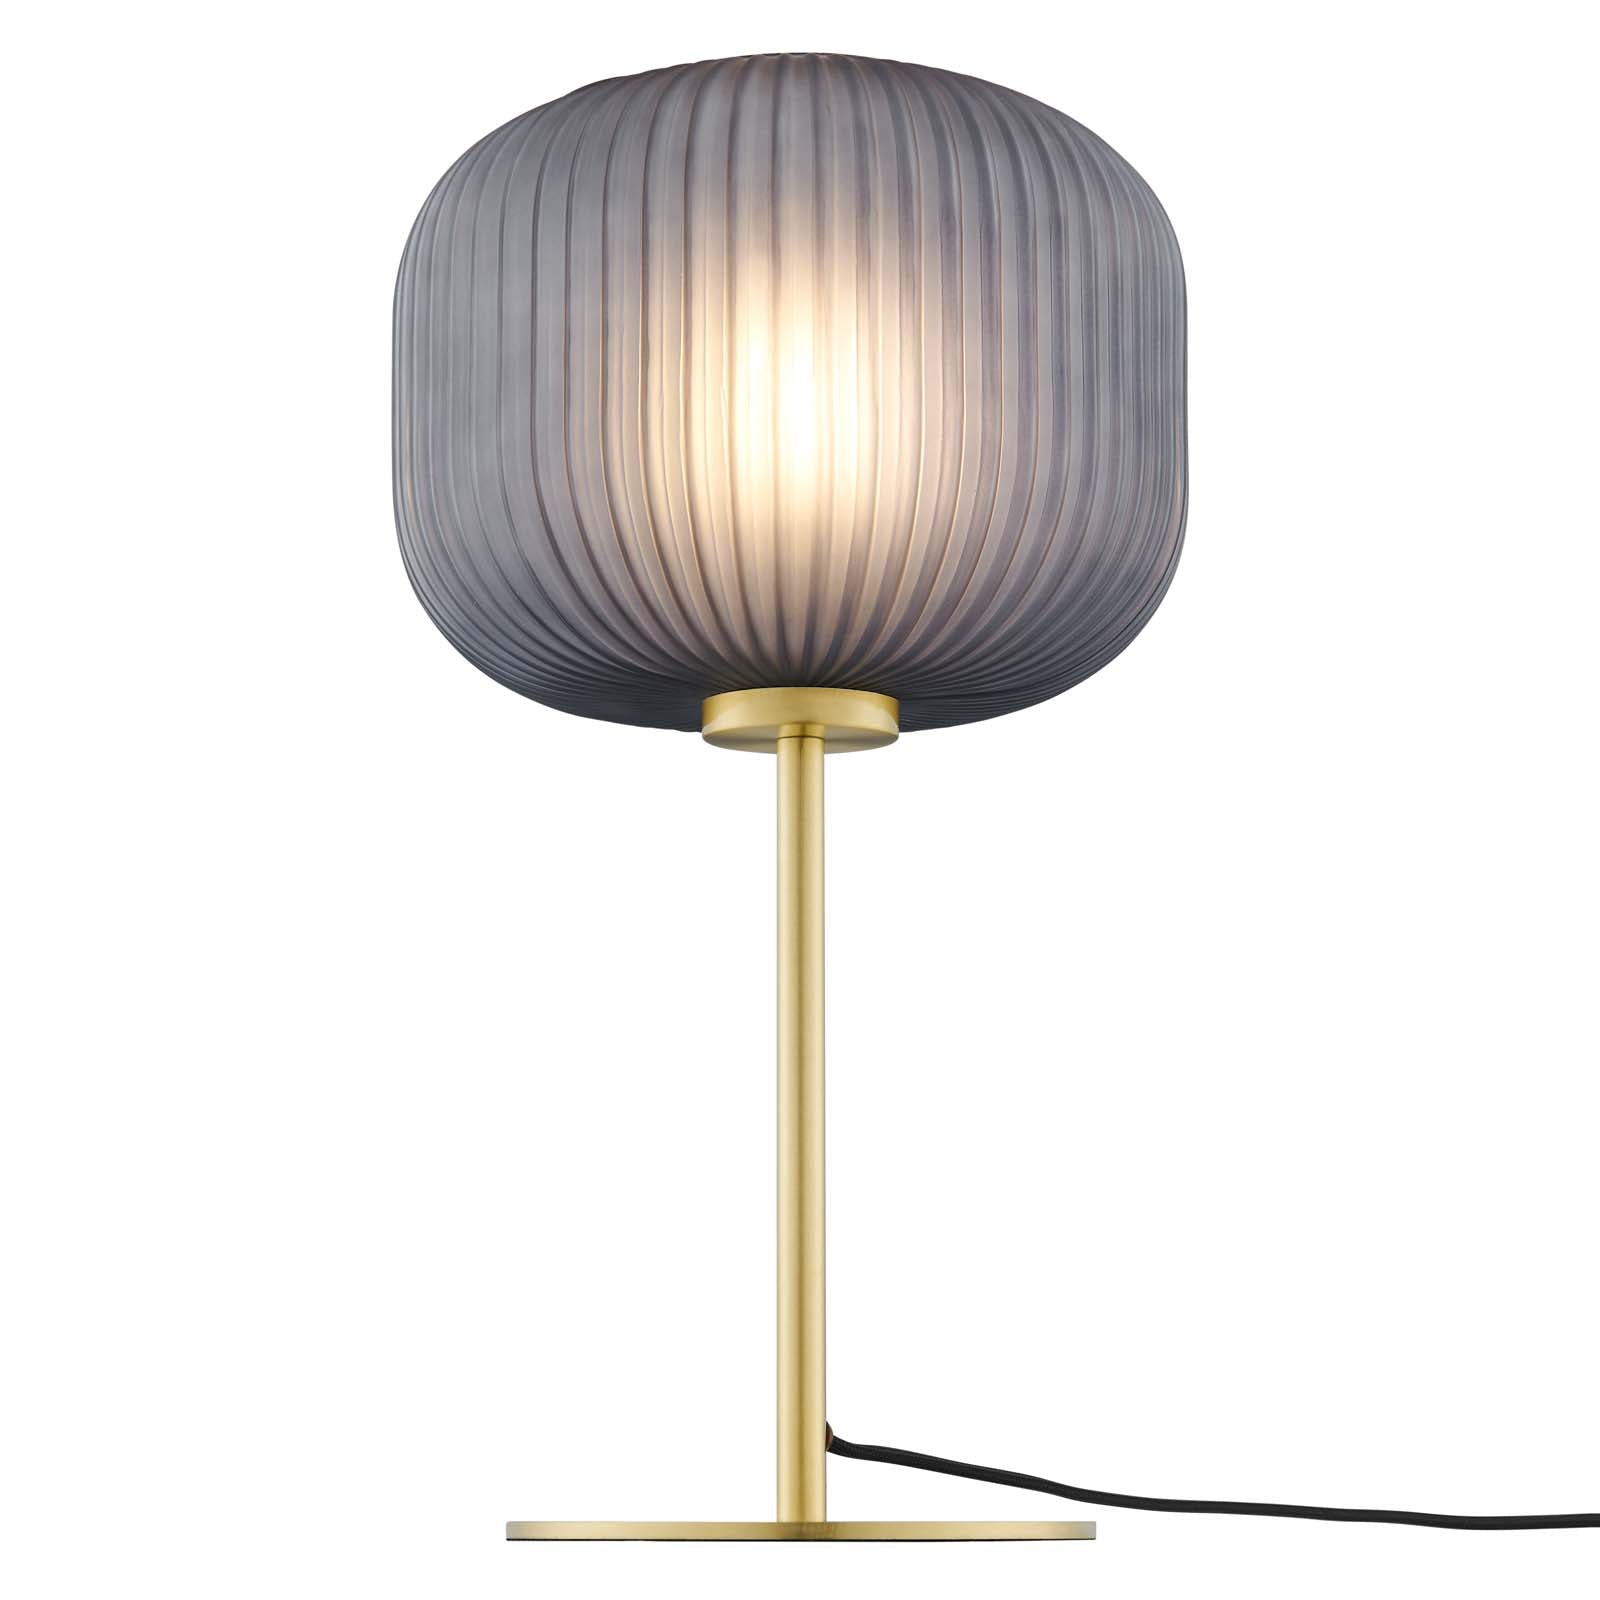 Modway Table Lamps - Reprise Glass Sphere Glass And Metal Table Lamp Black Satin Brass